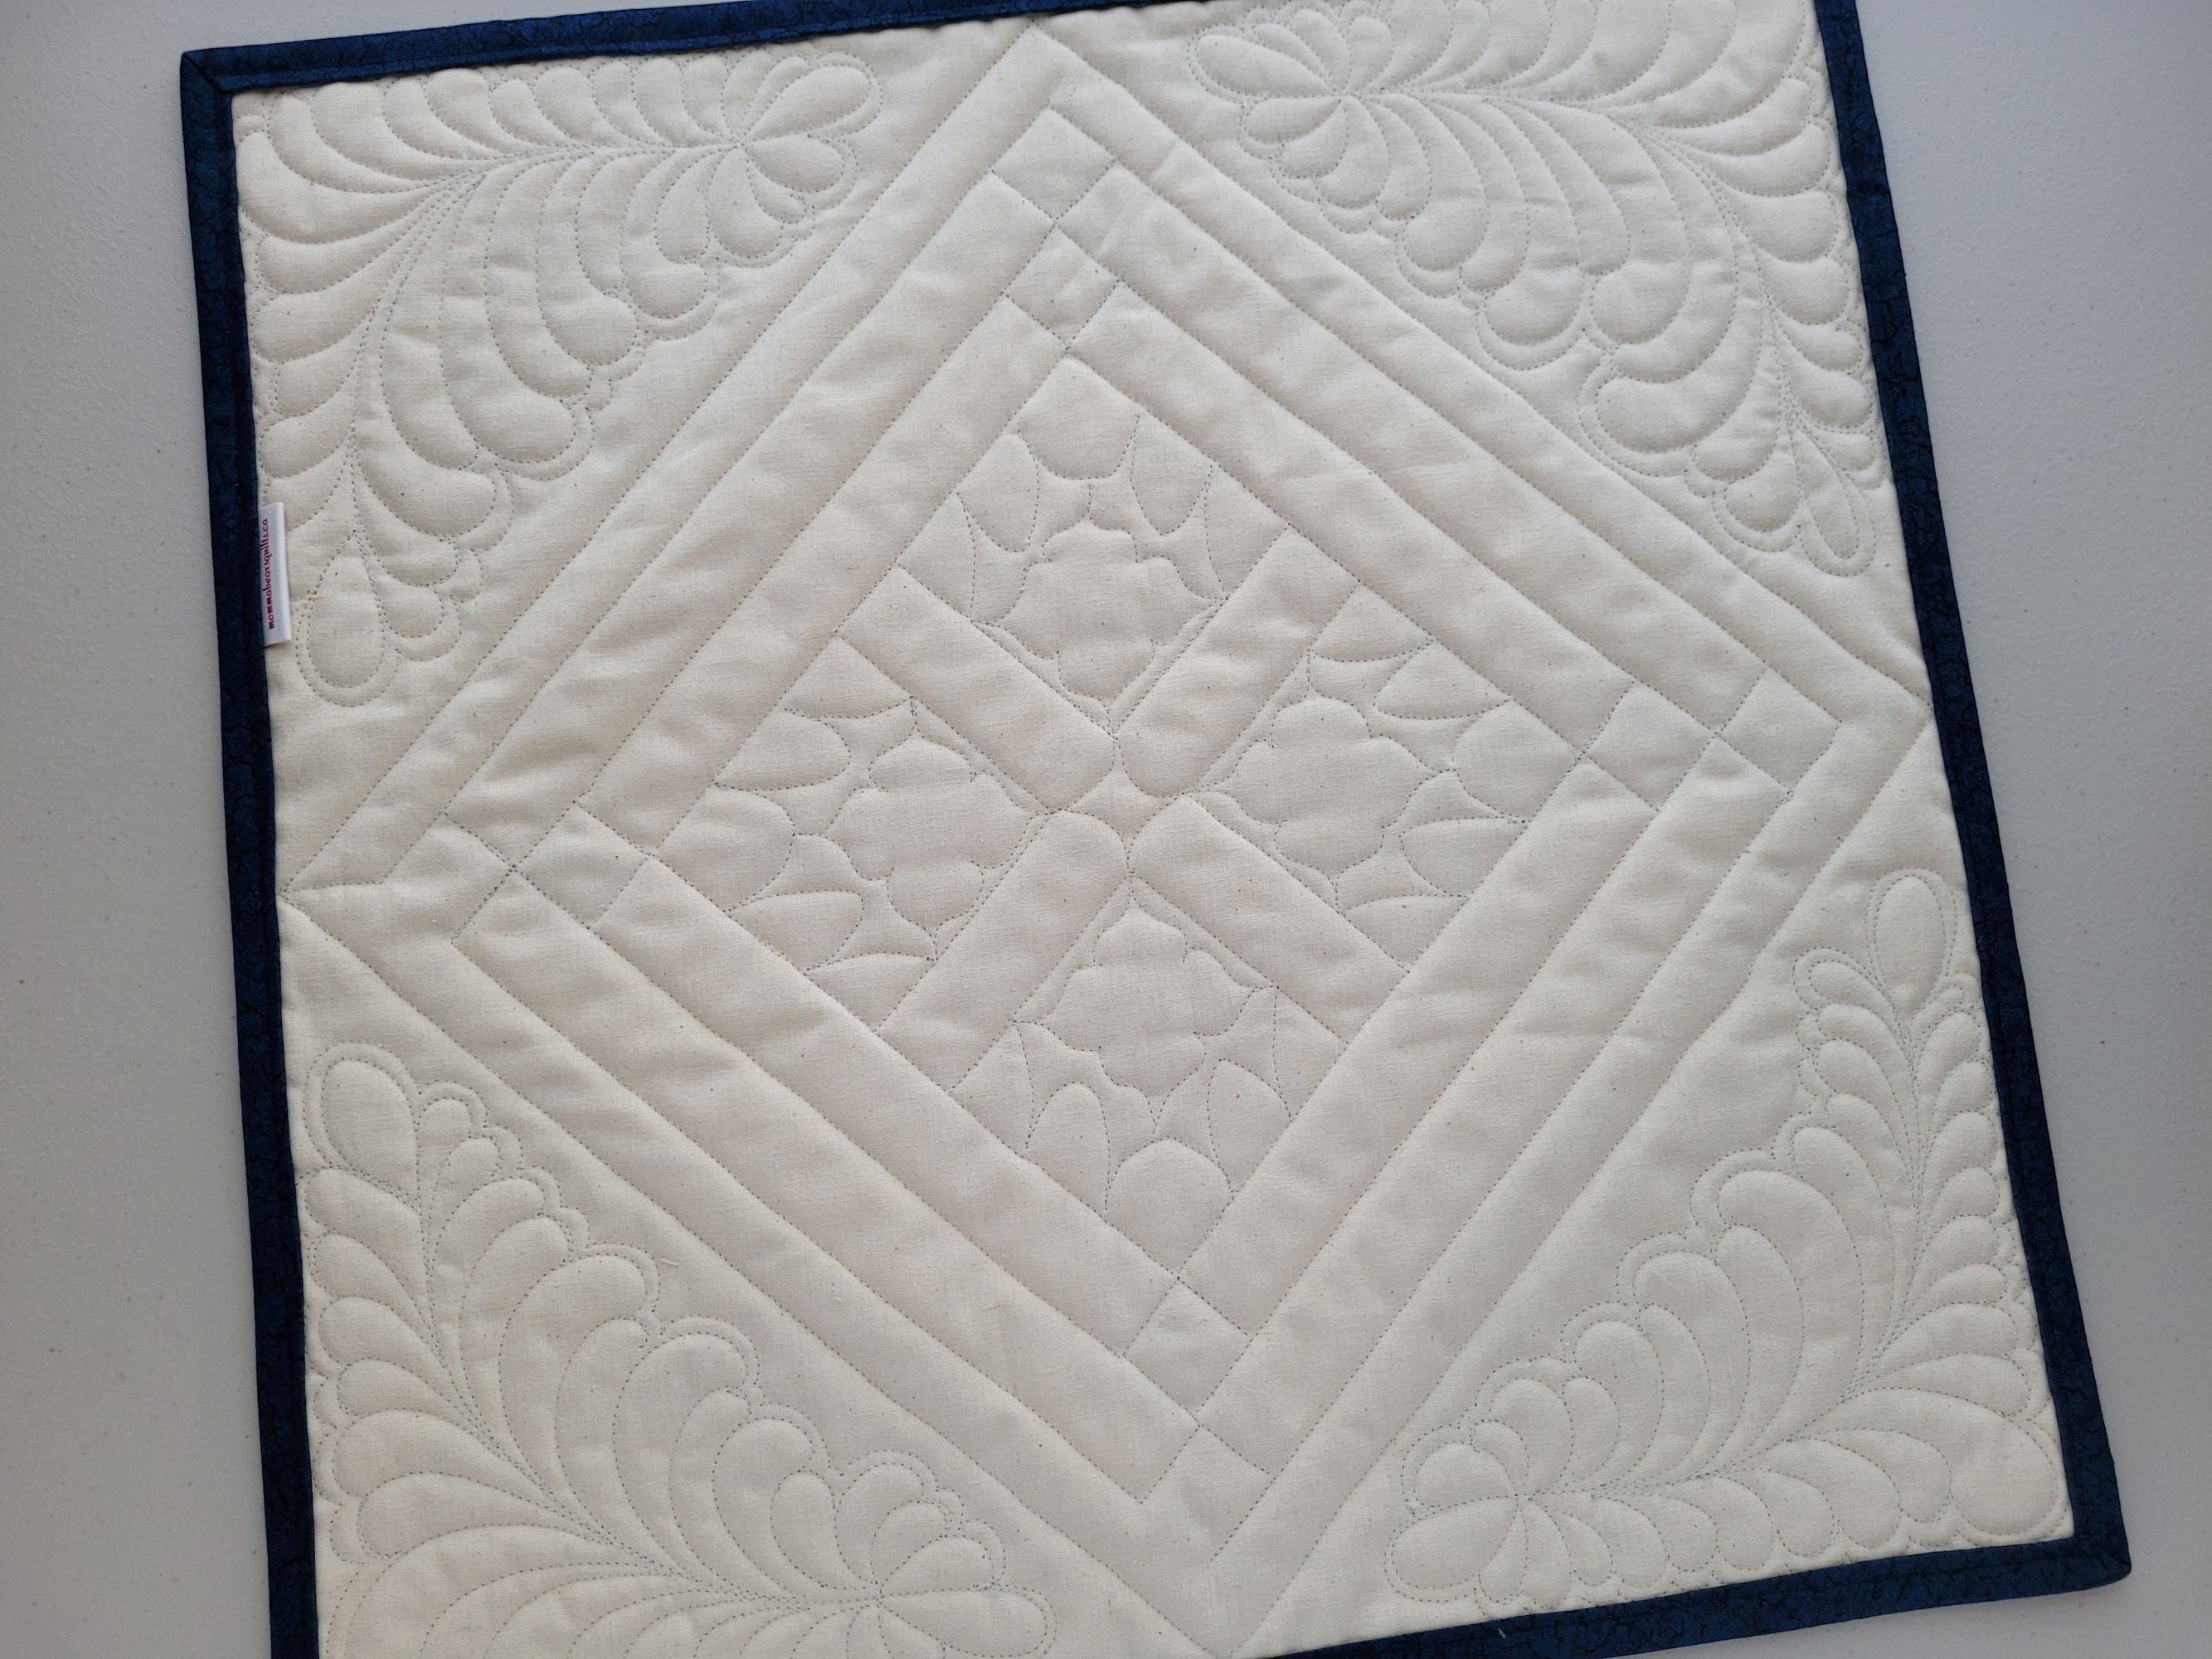 back of bear paw quilt